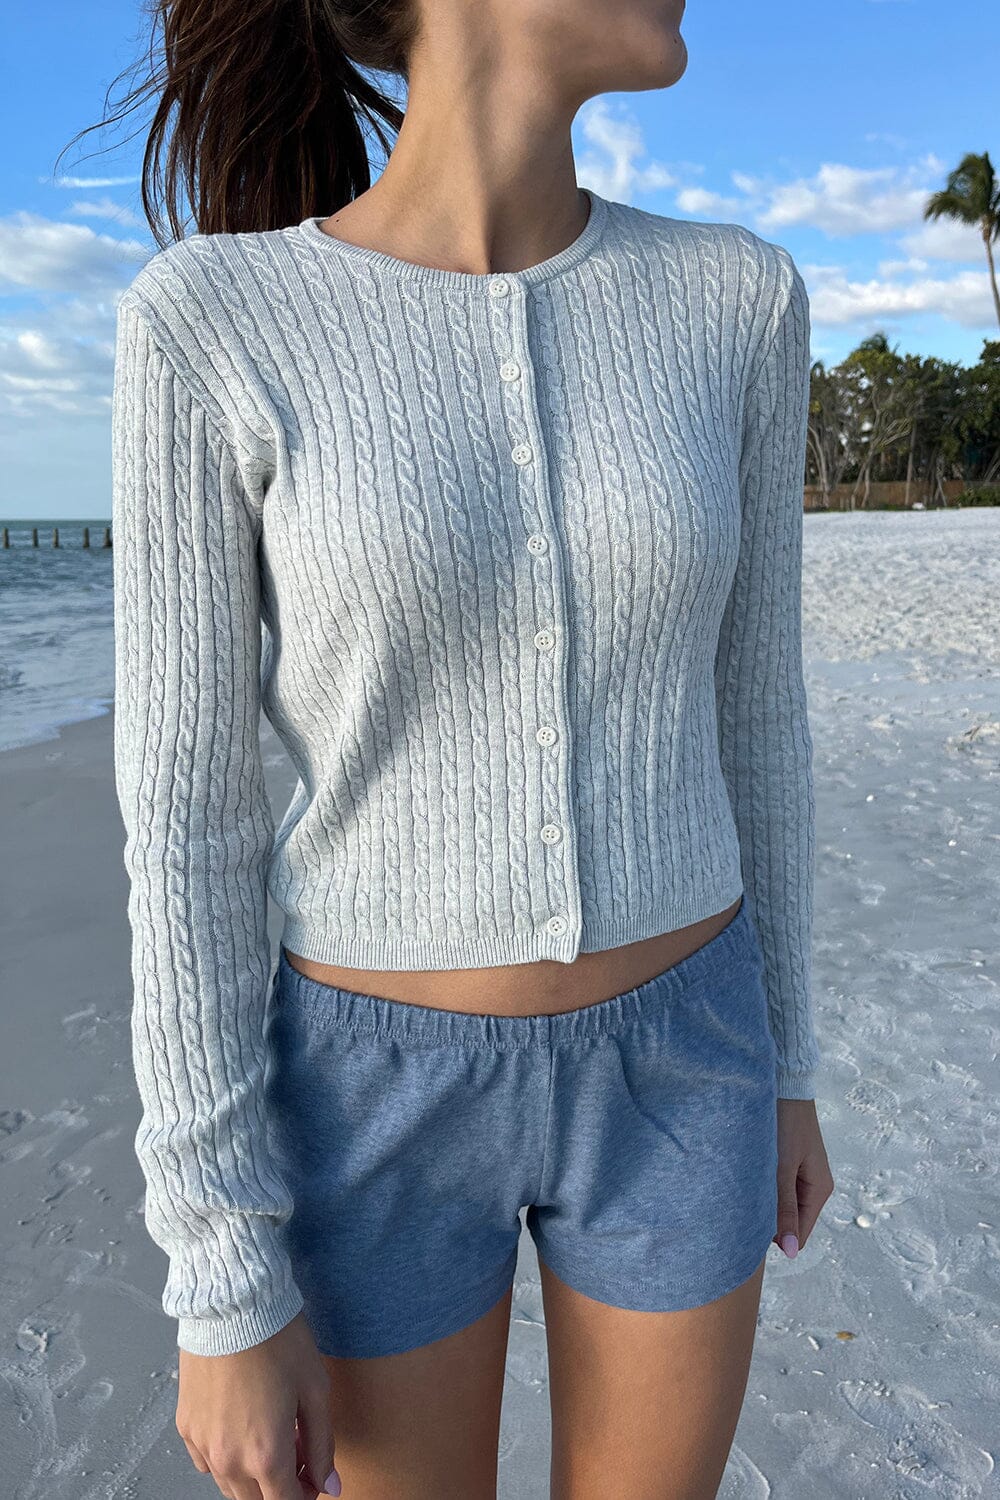 Brandy Melville, Sweaters, Black Cropped Sweater From Brandy Melville